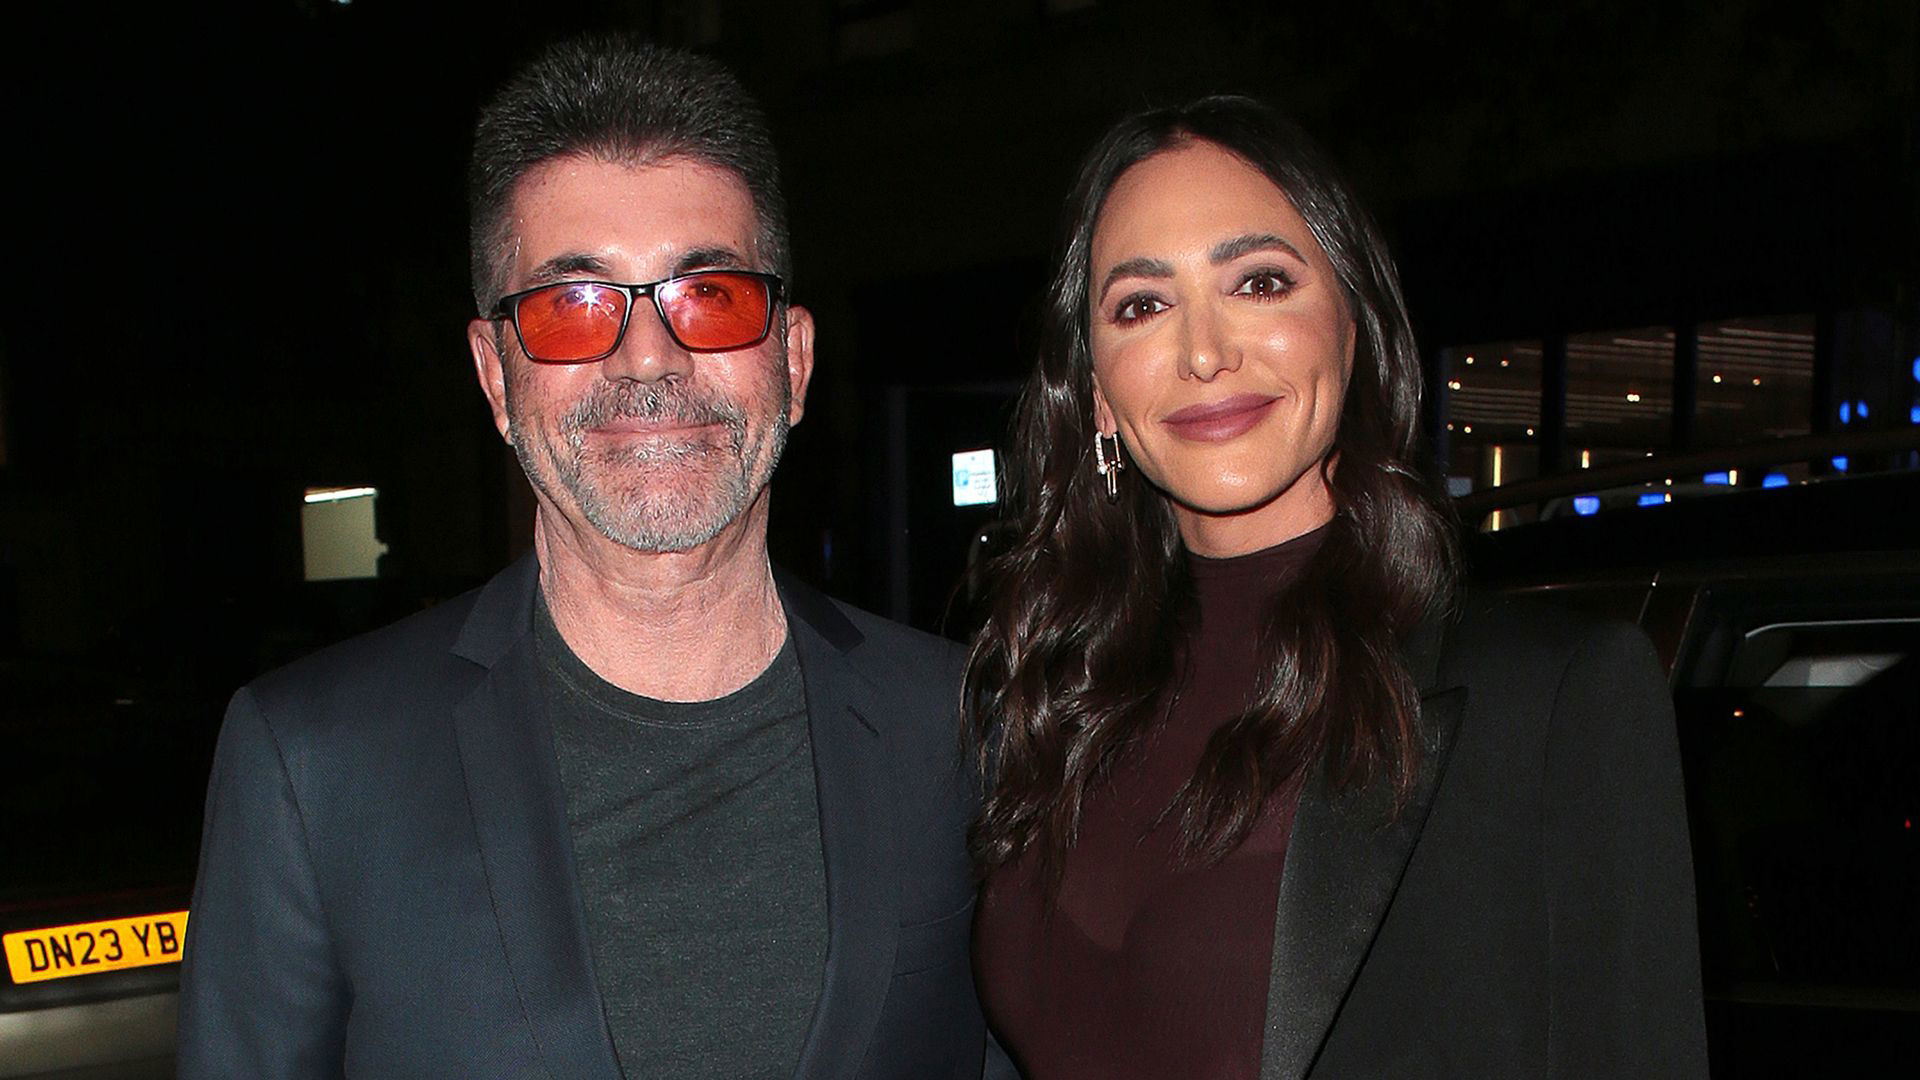 Simon Cowell Shows Off Bronzed Physique During Rare Outing With Fiancée Lauren Silverman